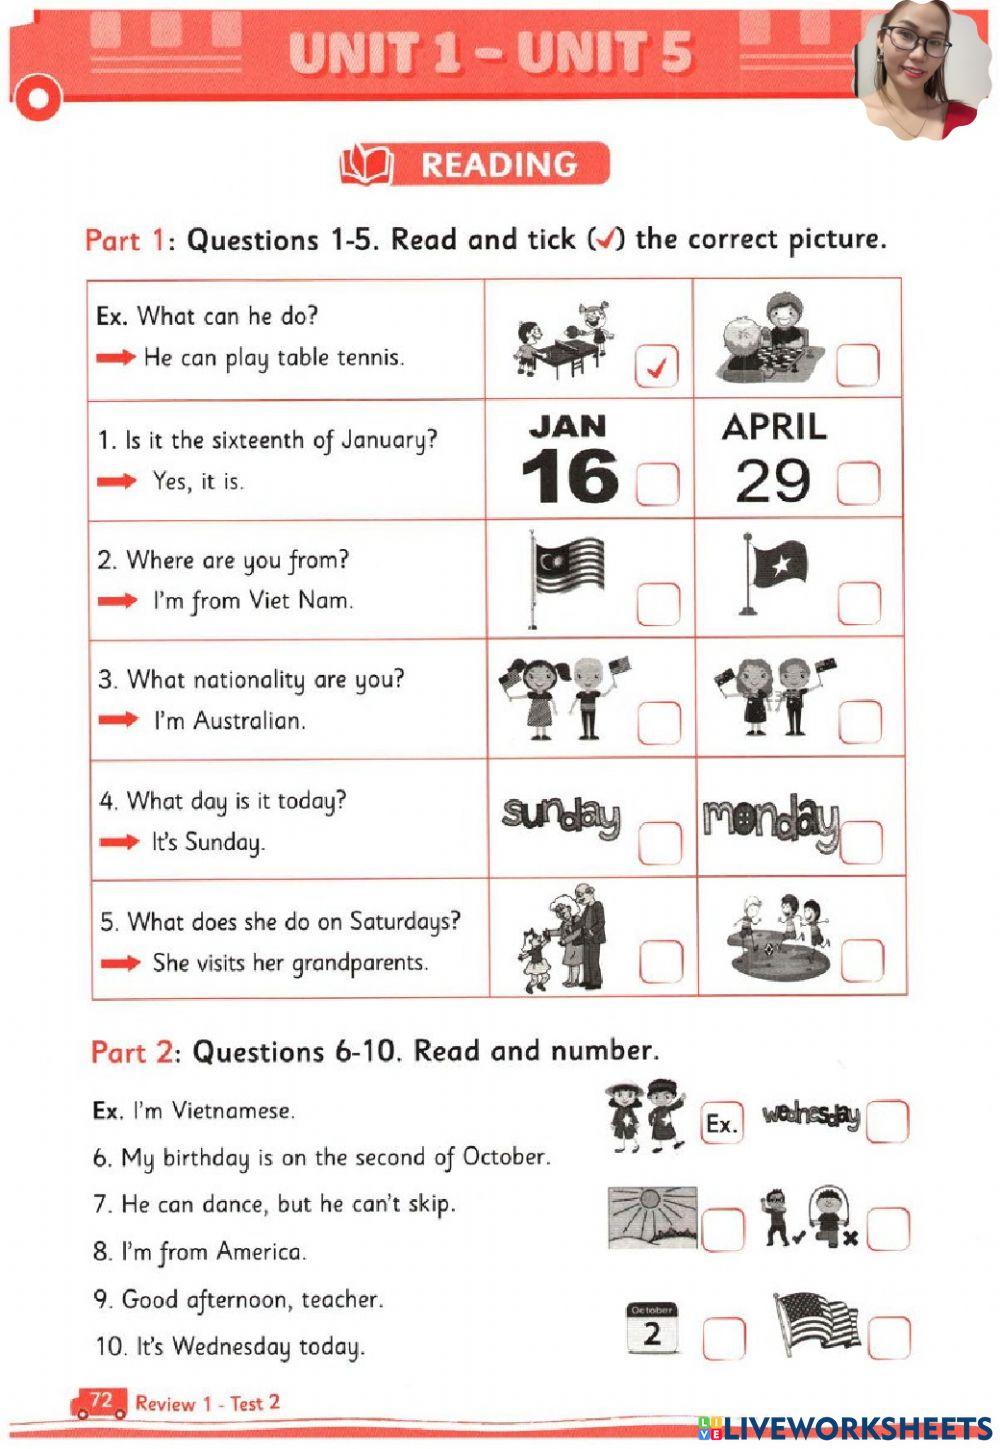 G4-big 4-review 1-test 2- P2